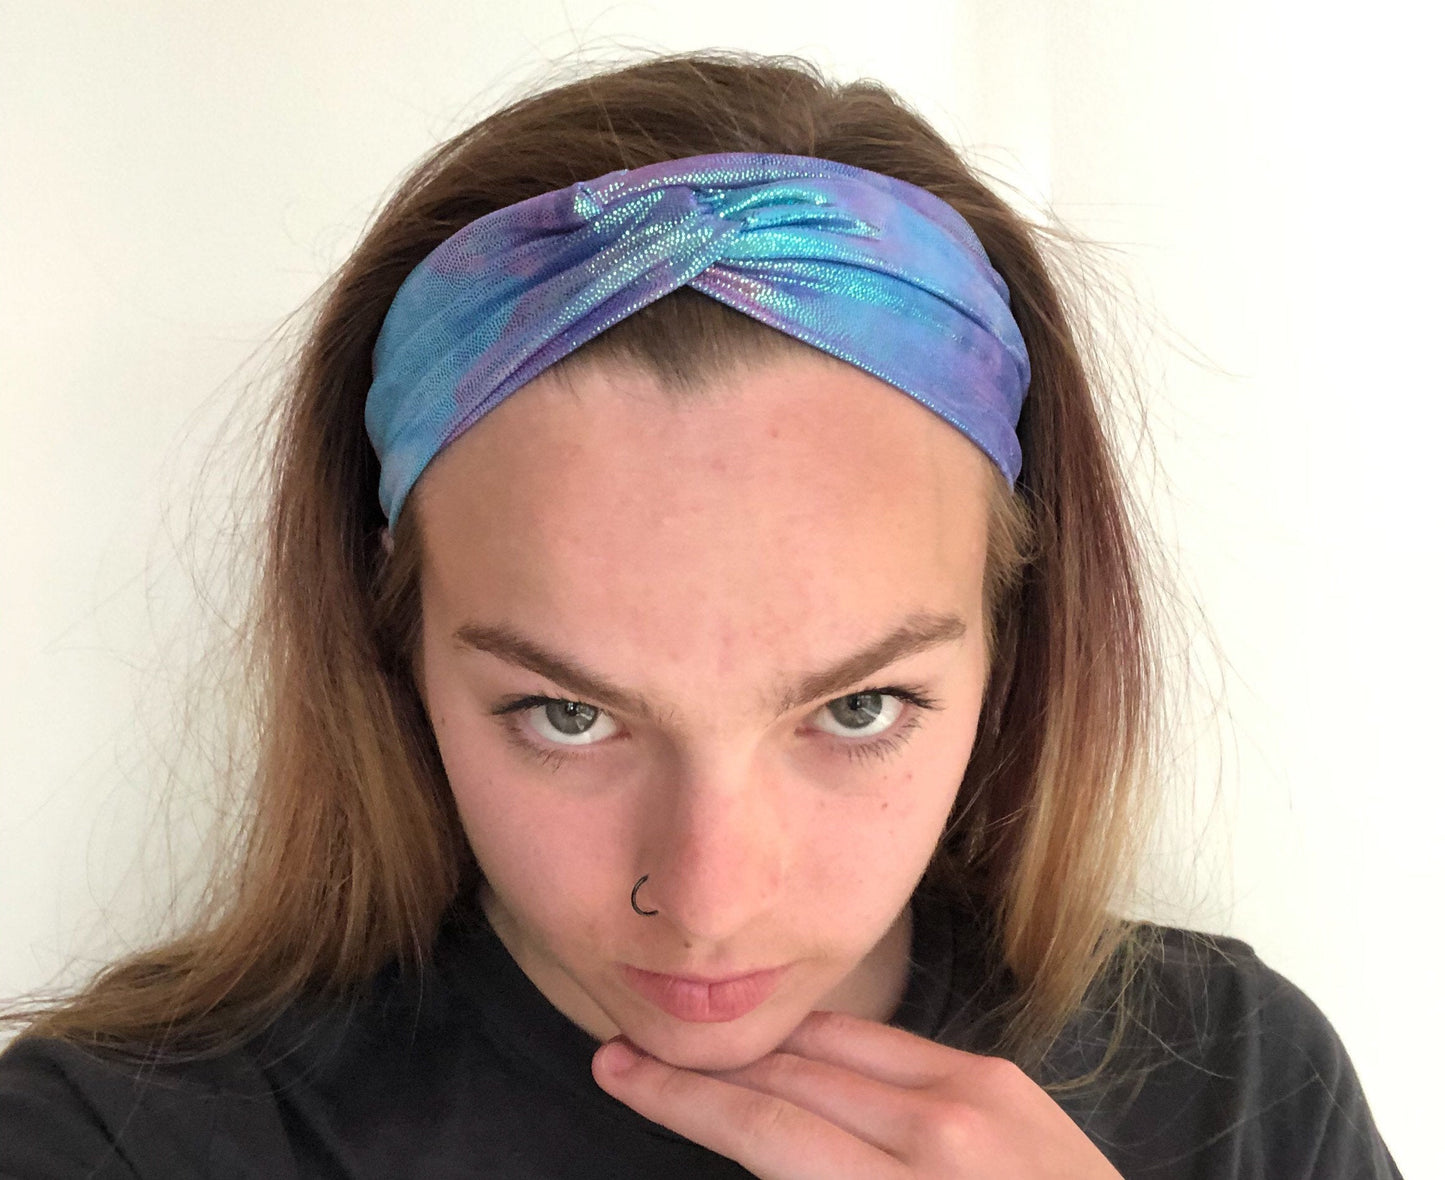 Wide Reversible Headband. 2 Tie-Dye Colors Available.  Stretchy and Comfortable for All Day Wear